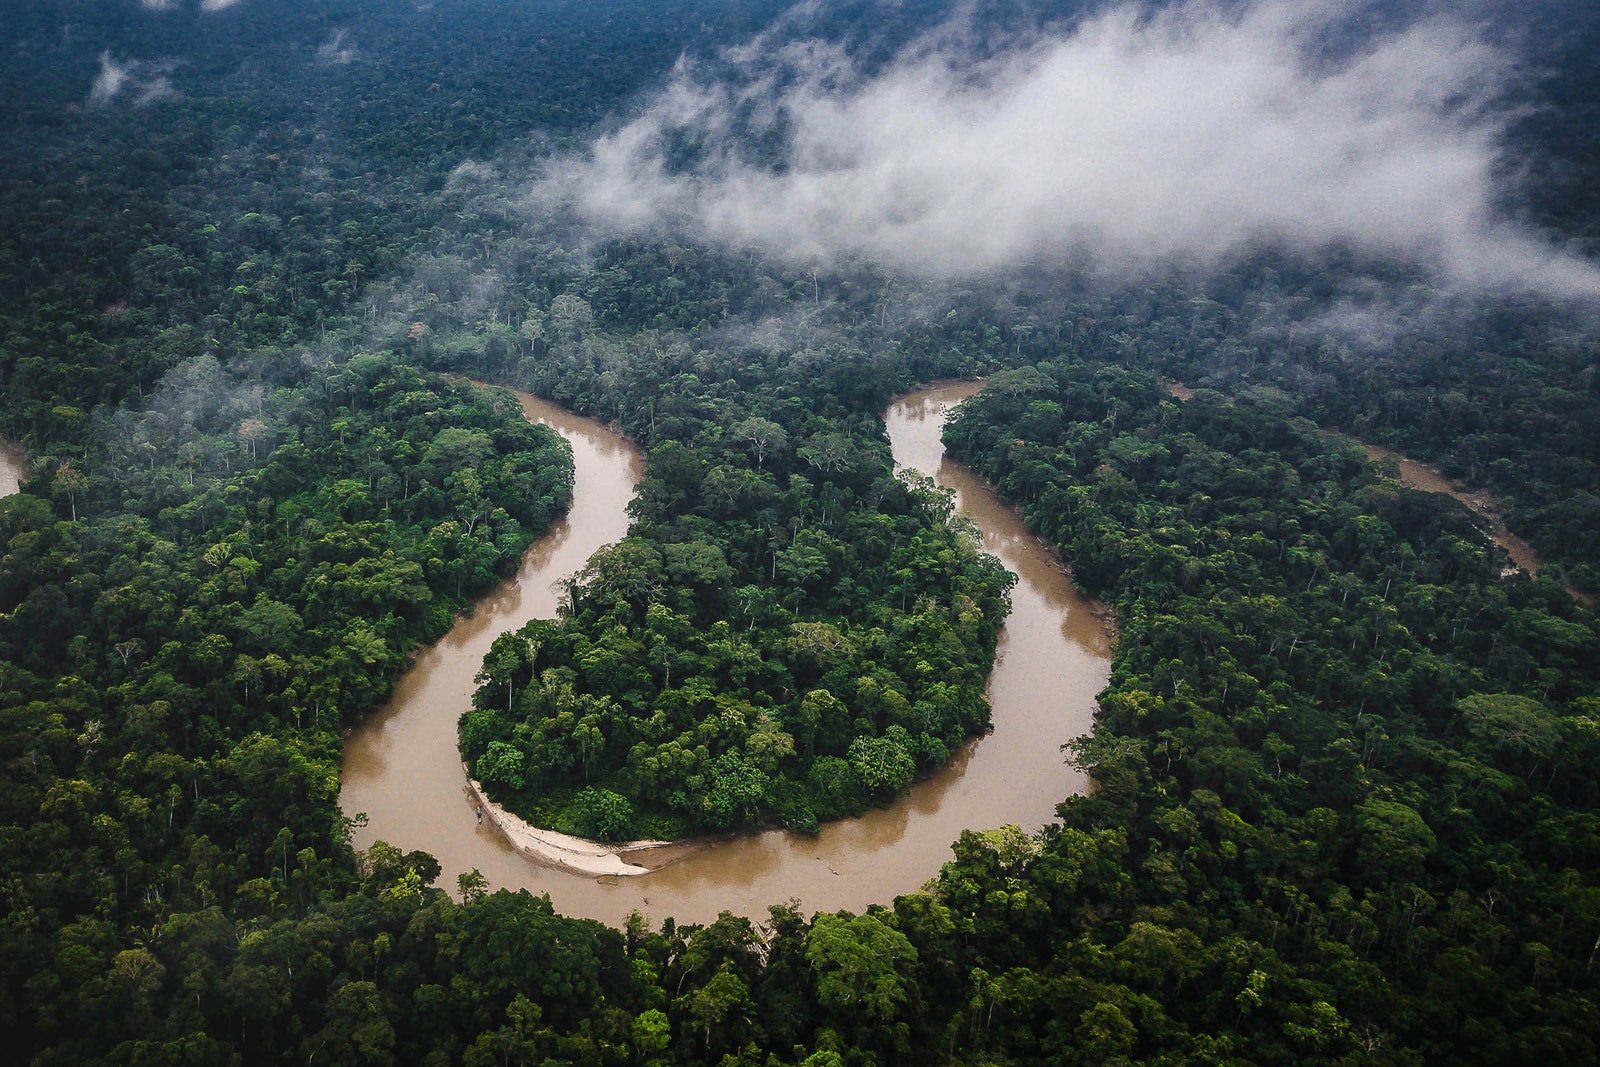 An aerial view of the Amazon River in Ecuador with clouds above